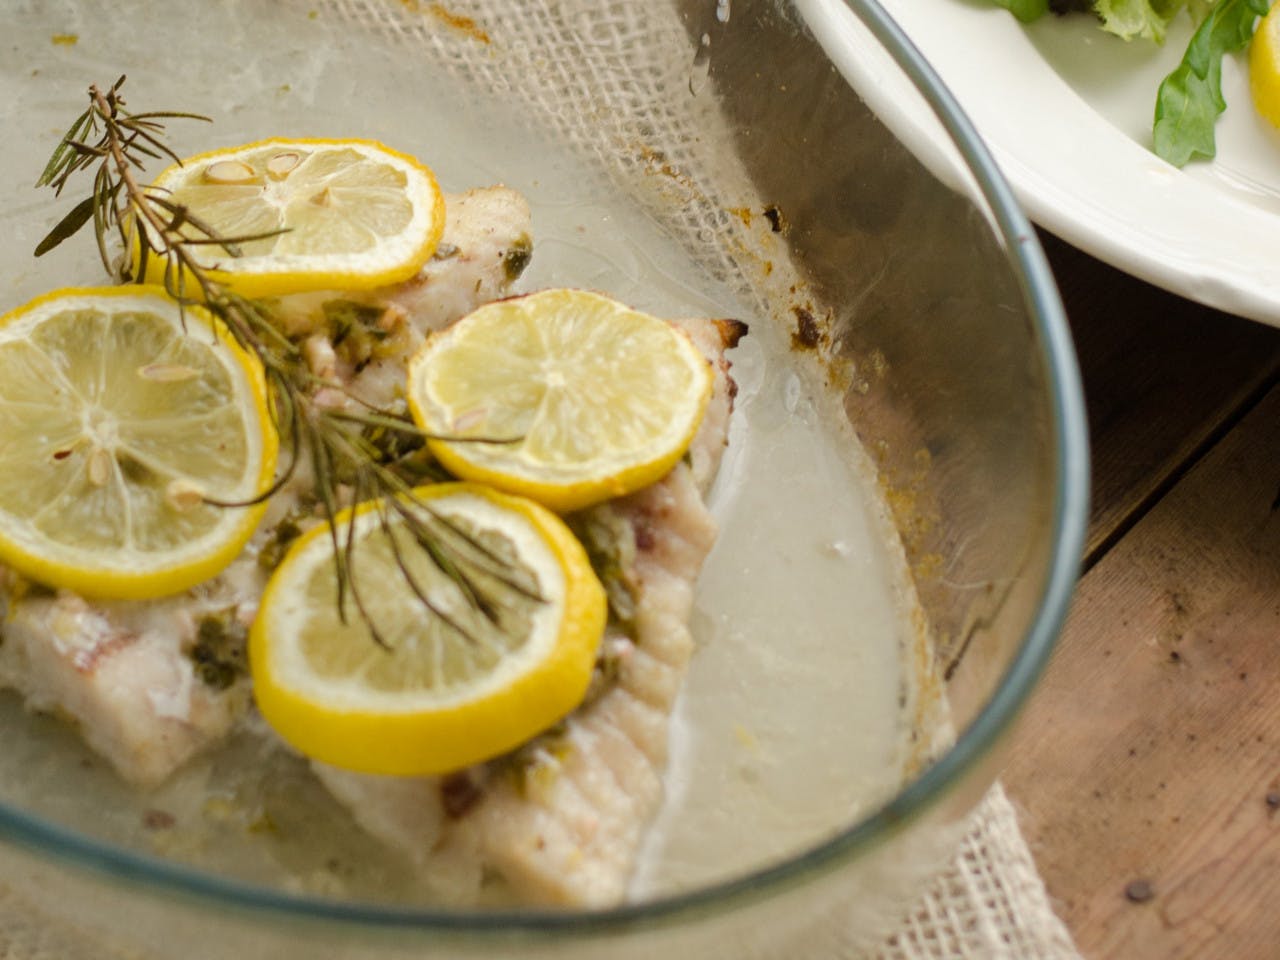 Oven baked cod with lemon and rosemary